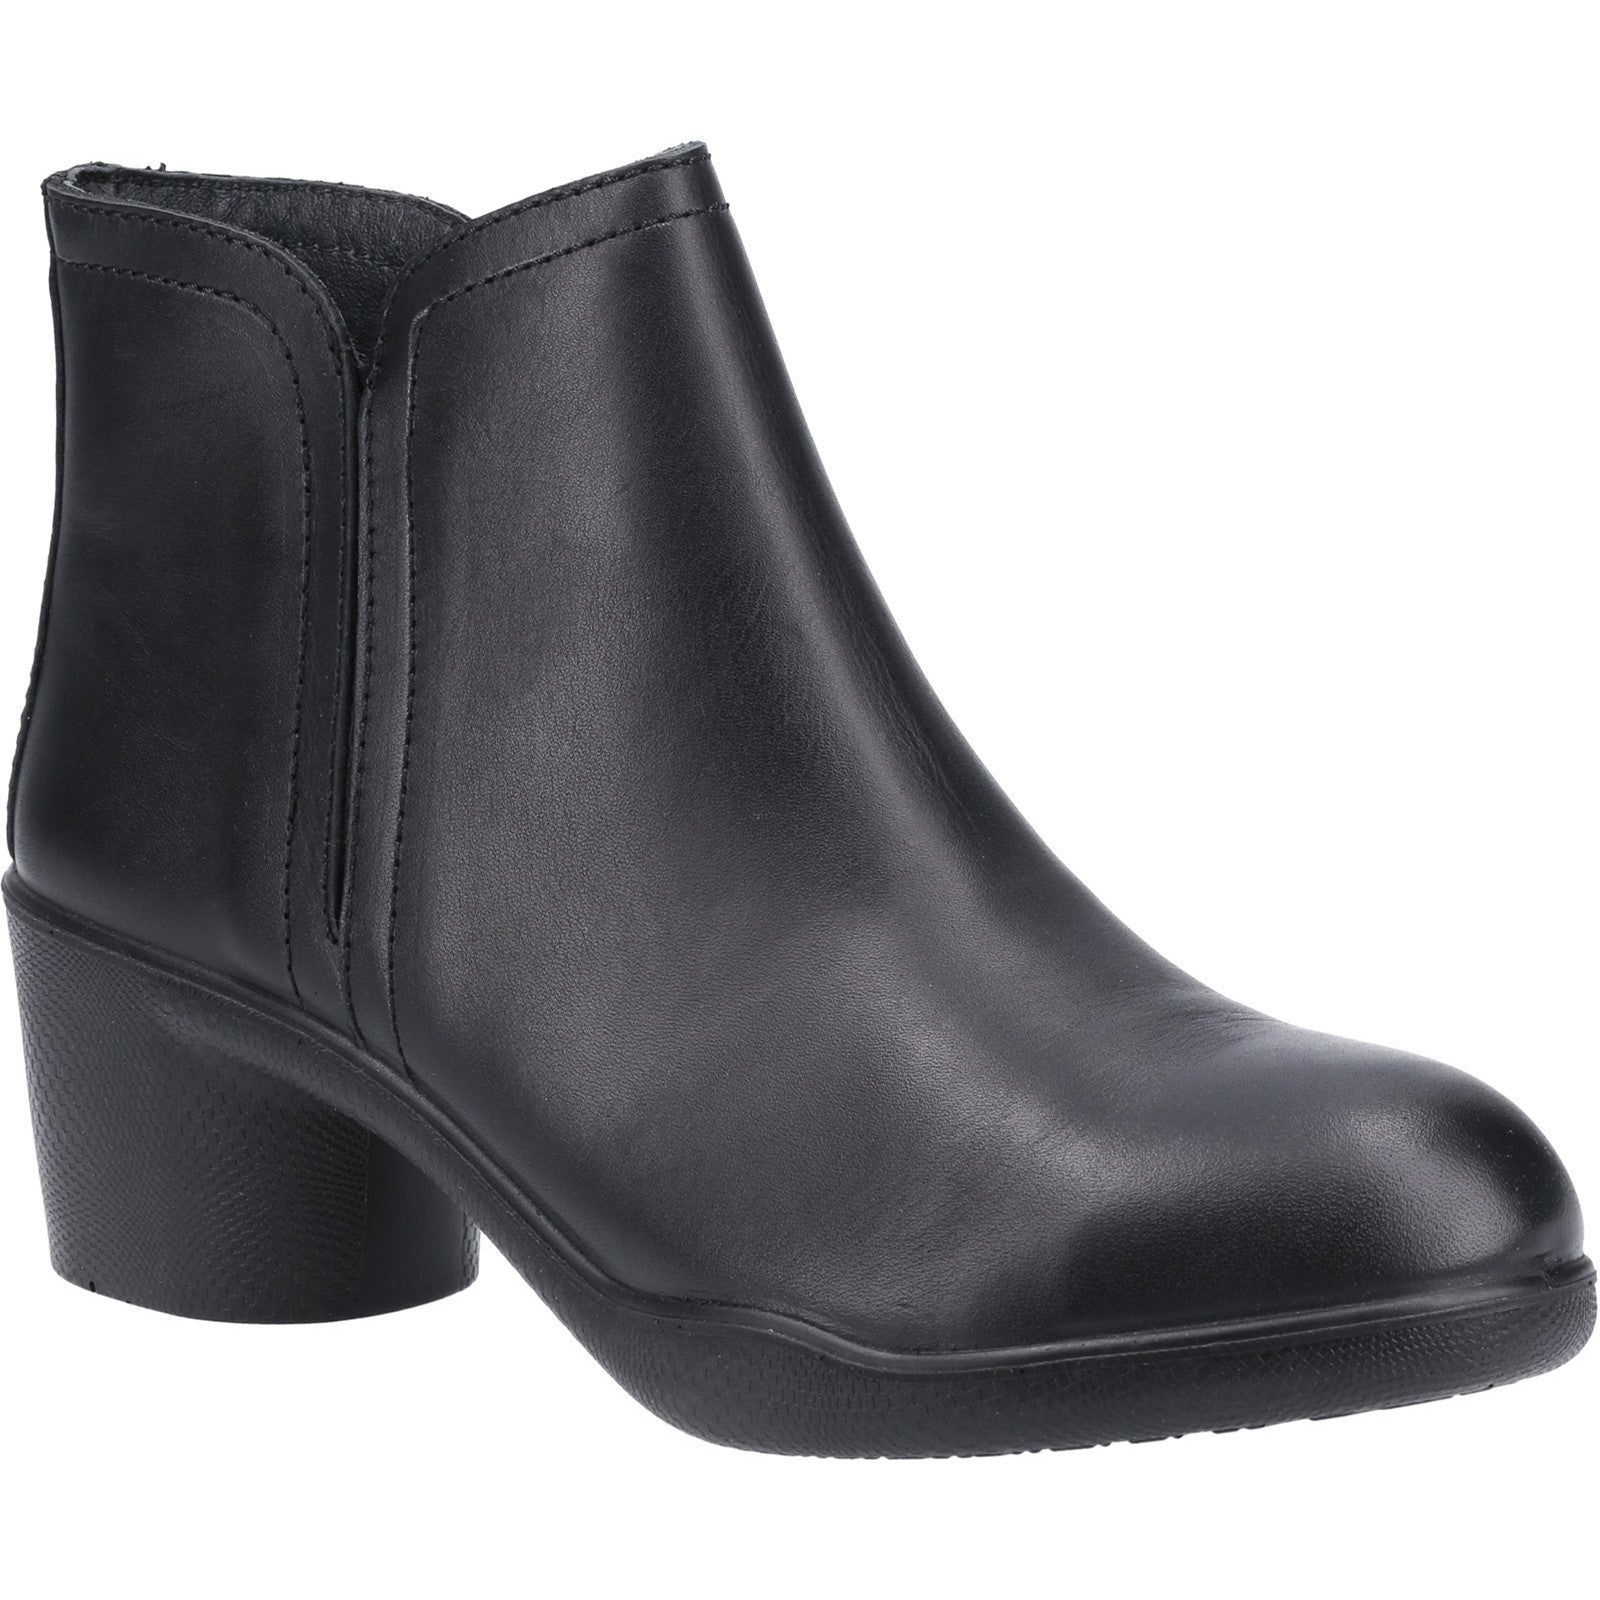 Amblers AS608 Tina Ladies Safety Ankle boot